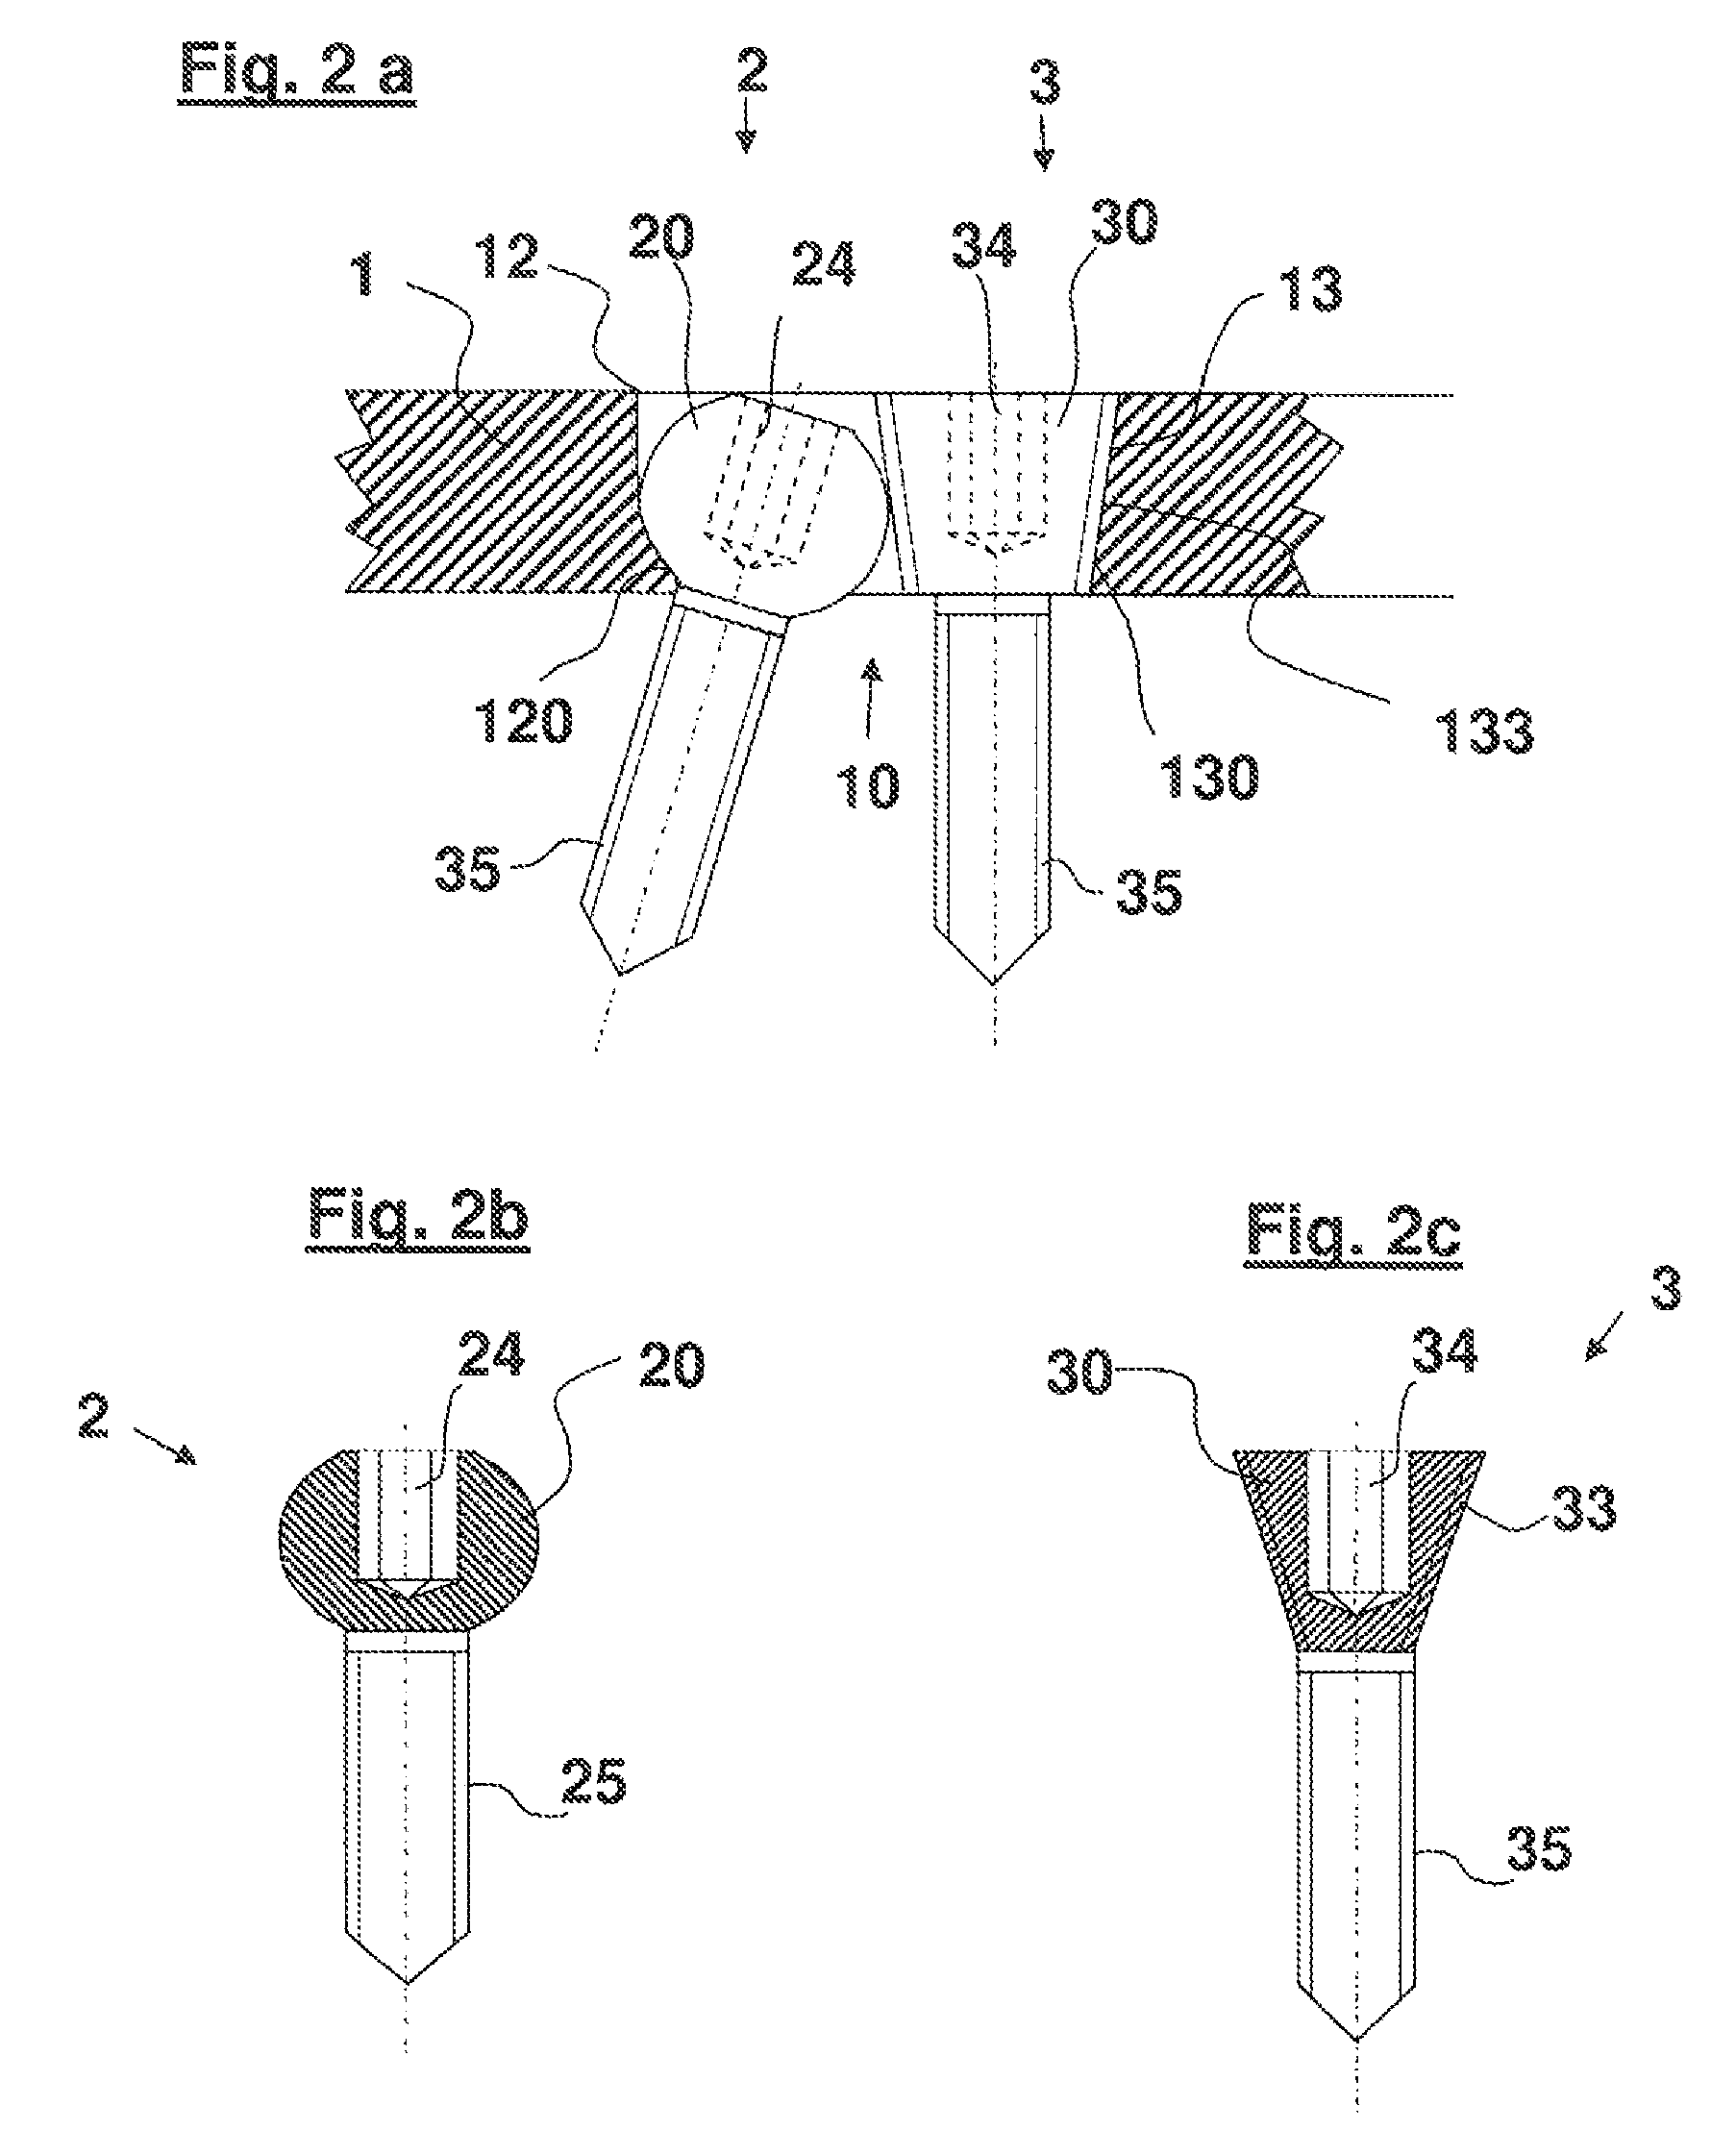 Bone plate system for osteosynthesis